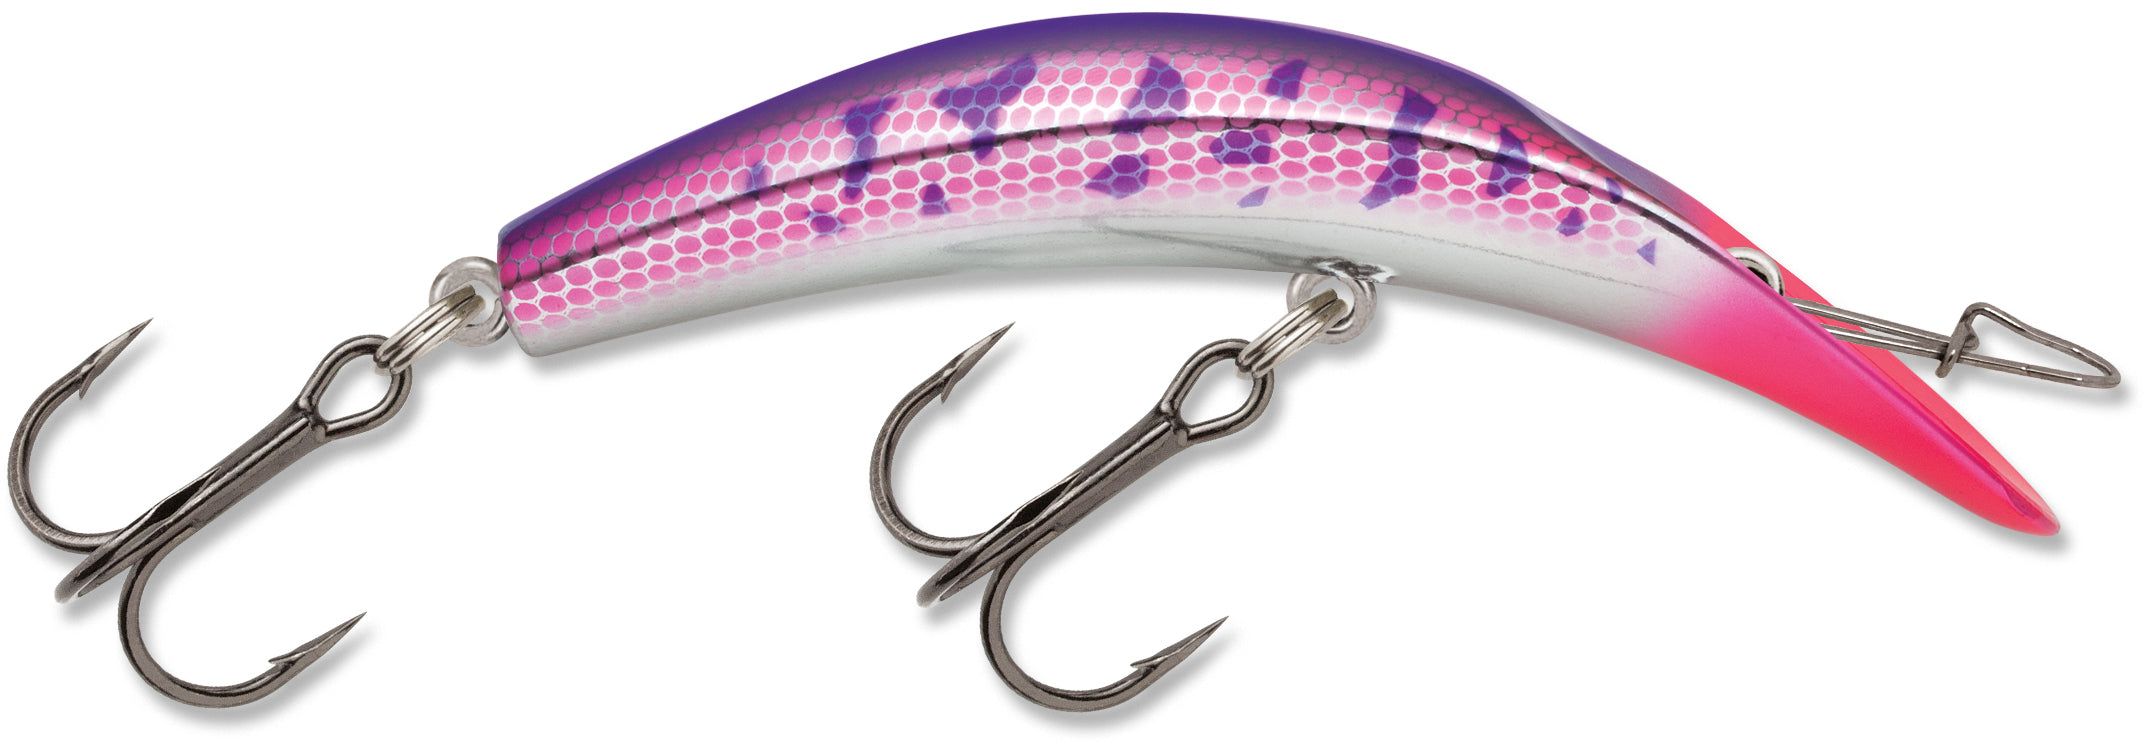 LUHR JENSEN KWIKFISH XTREME NON RATTLE - FRED'S CUSTOM TACKLE